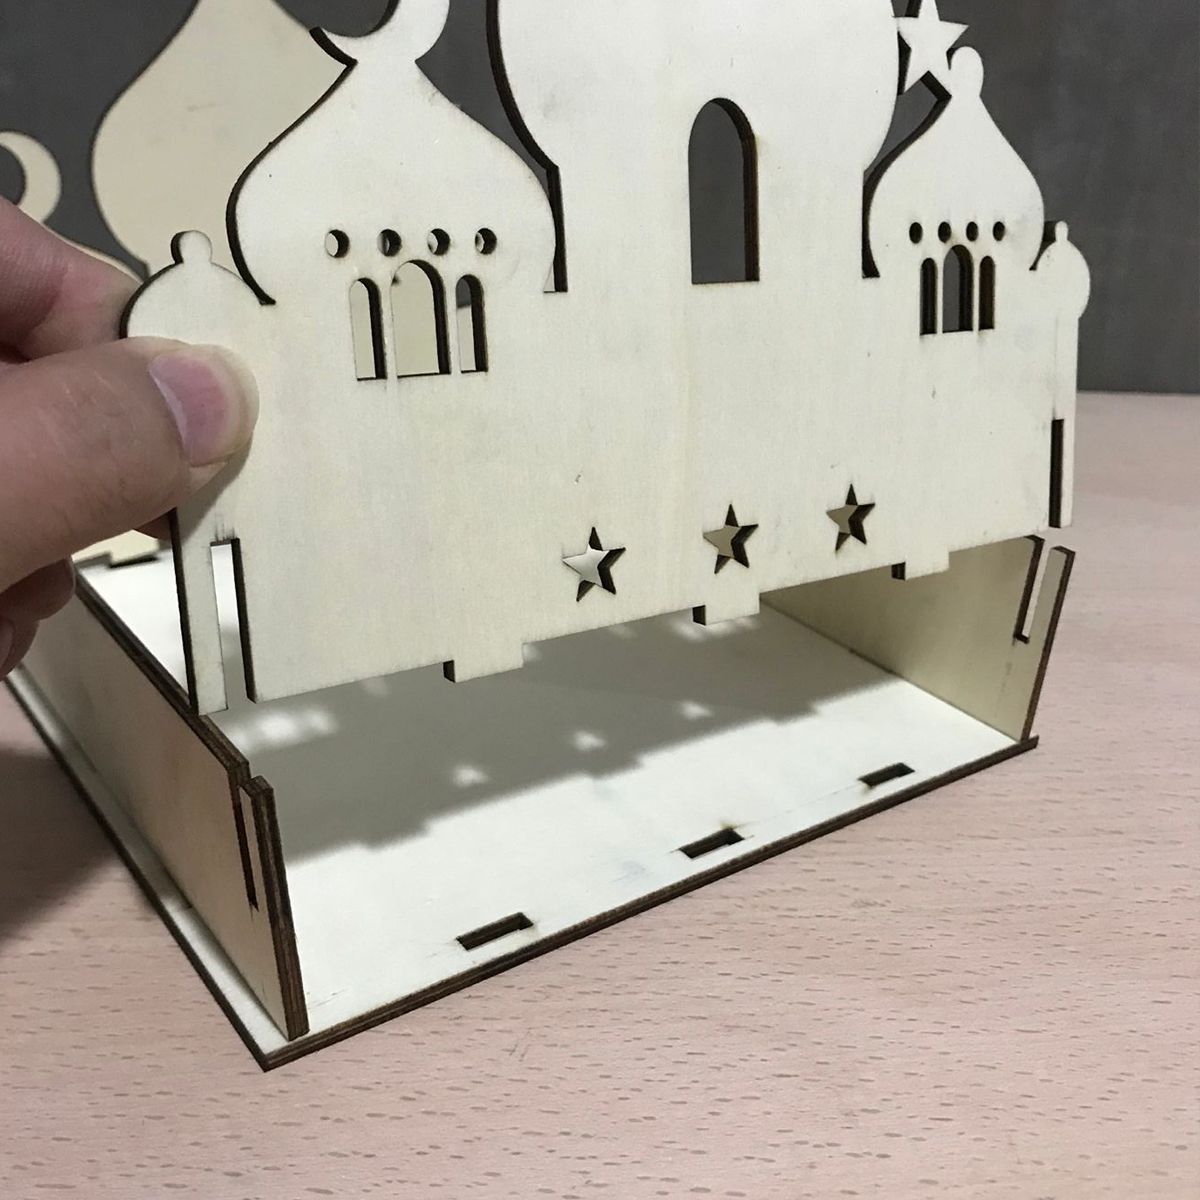 Self-Assembly-Puzzle-Wooden-Building-Model-Kits-DIY-Islamic-House-Stand-Rack-Ramadan-Gifts-Decoratio-1450275